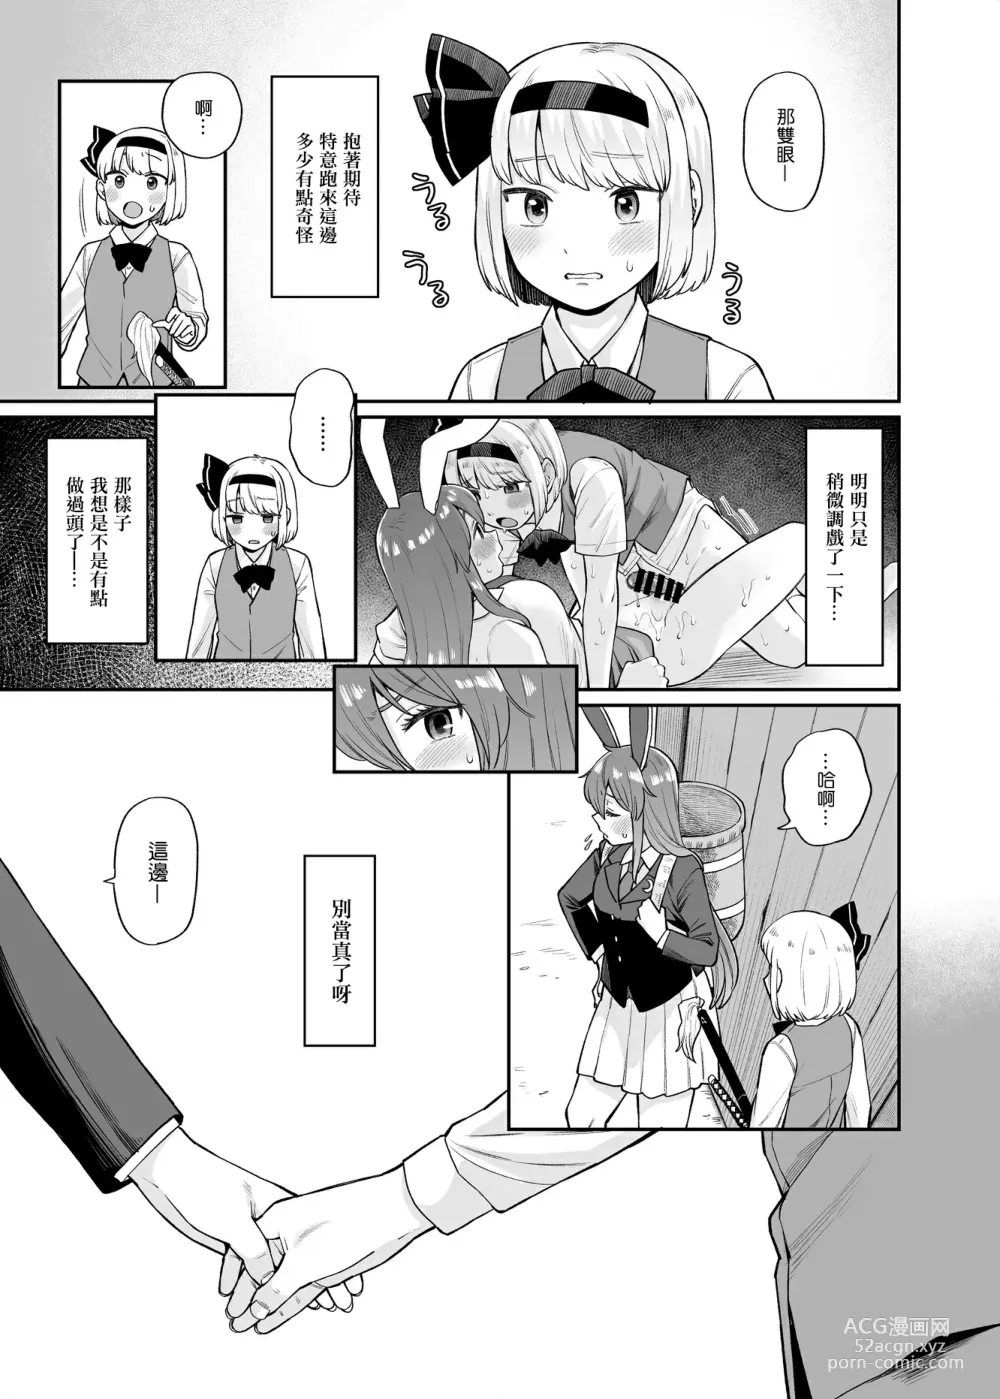 Page 3 of doujinshi 乌冬铃仙系列第3话